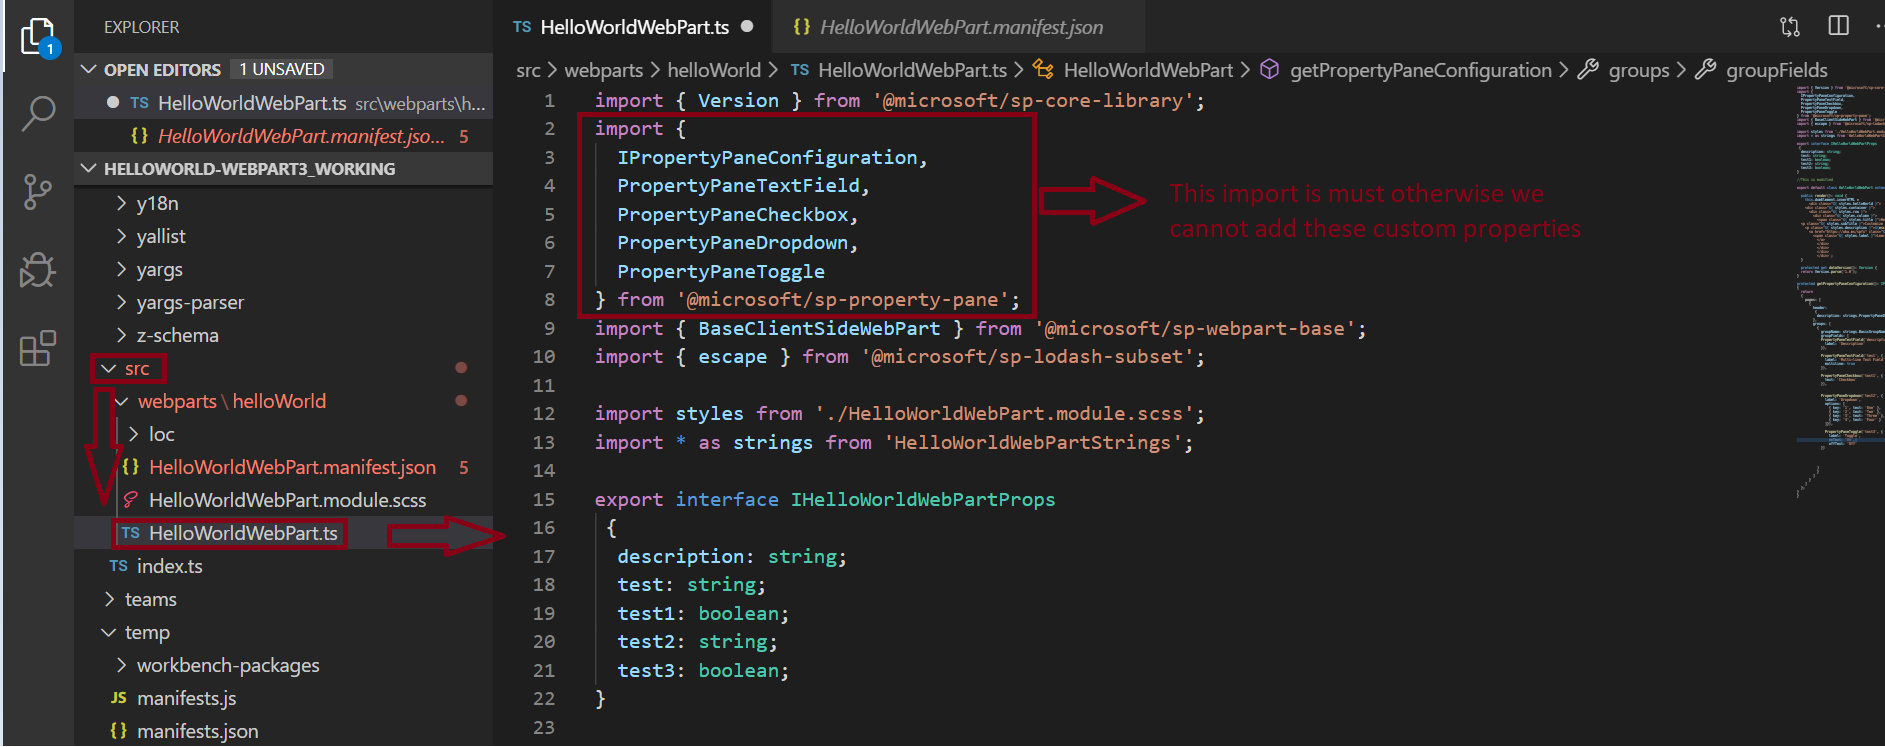 Import microsoft-sp-property-pane for the custom property